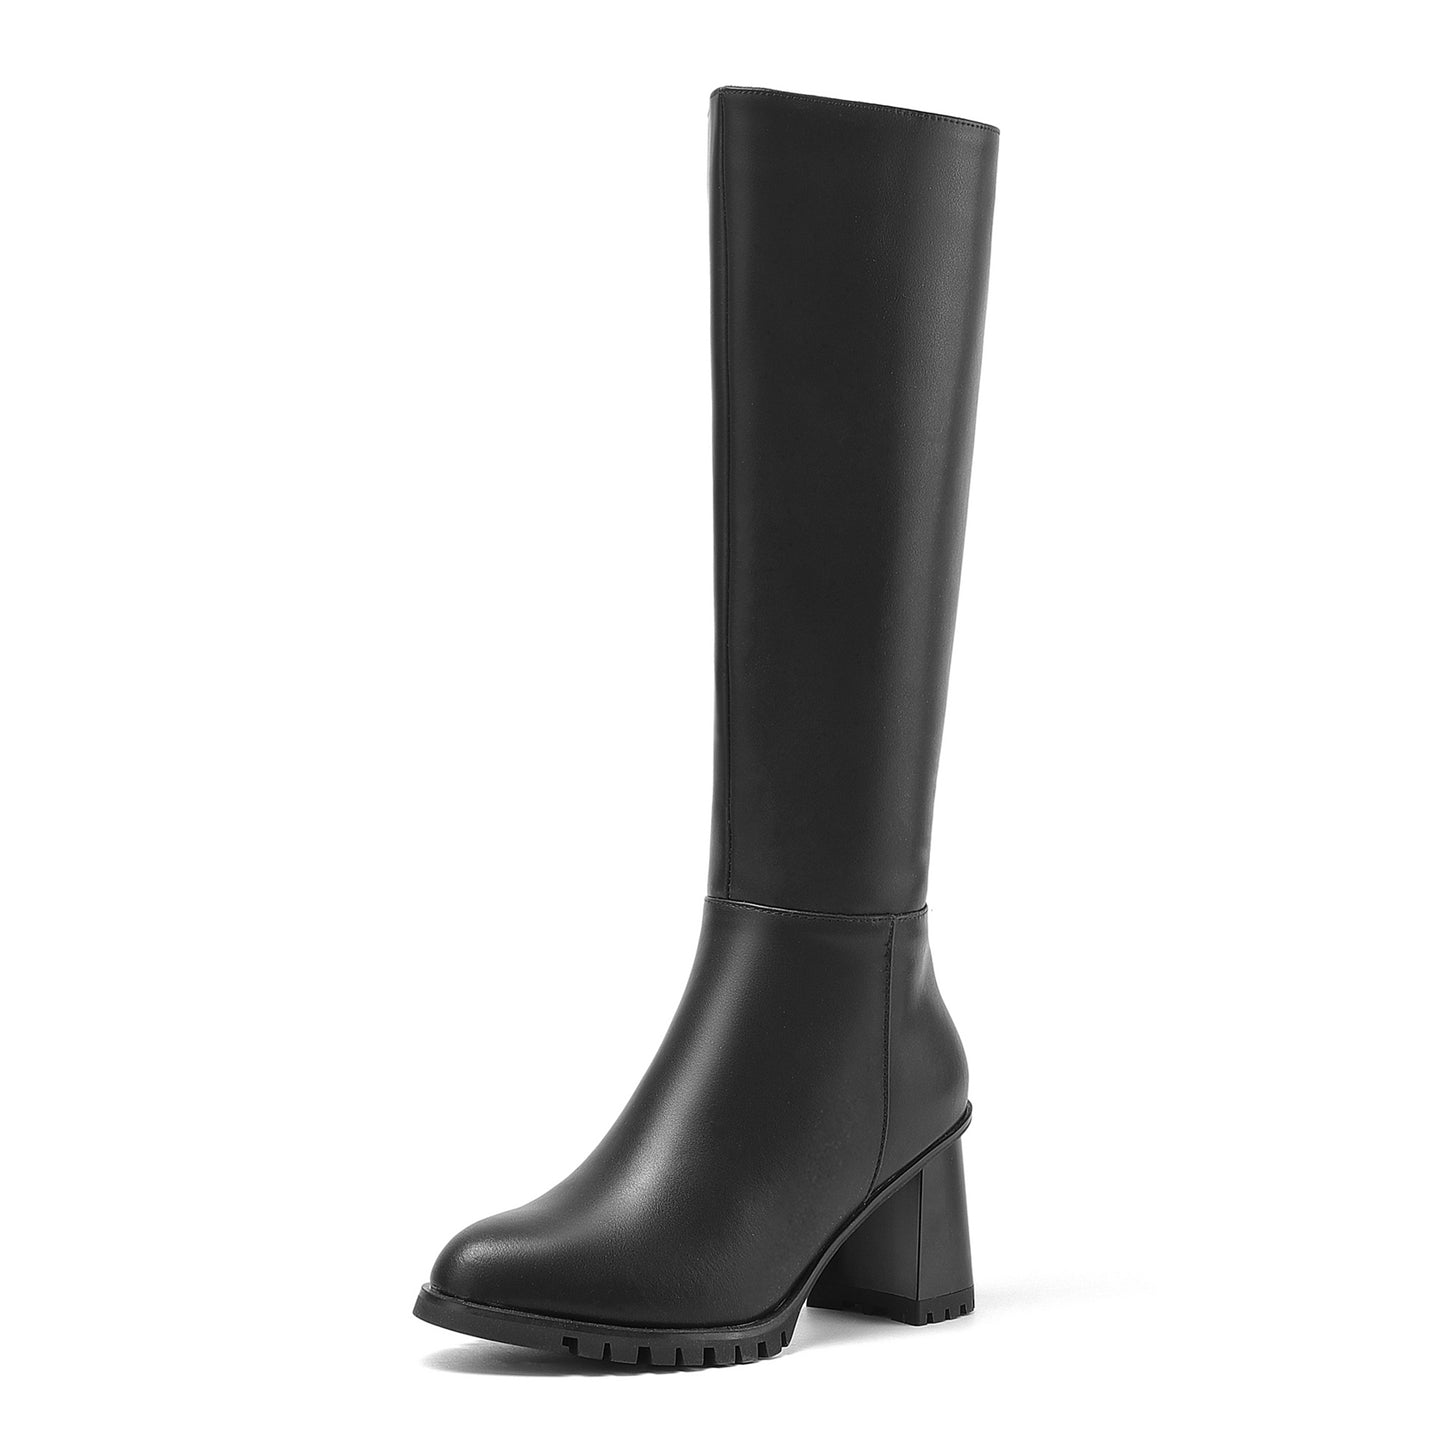 TinaCus Women's Round Toe Genuine Leather Hnadmade High Chunky Heels Side Zip Up Knee High Boots